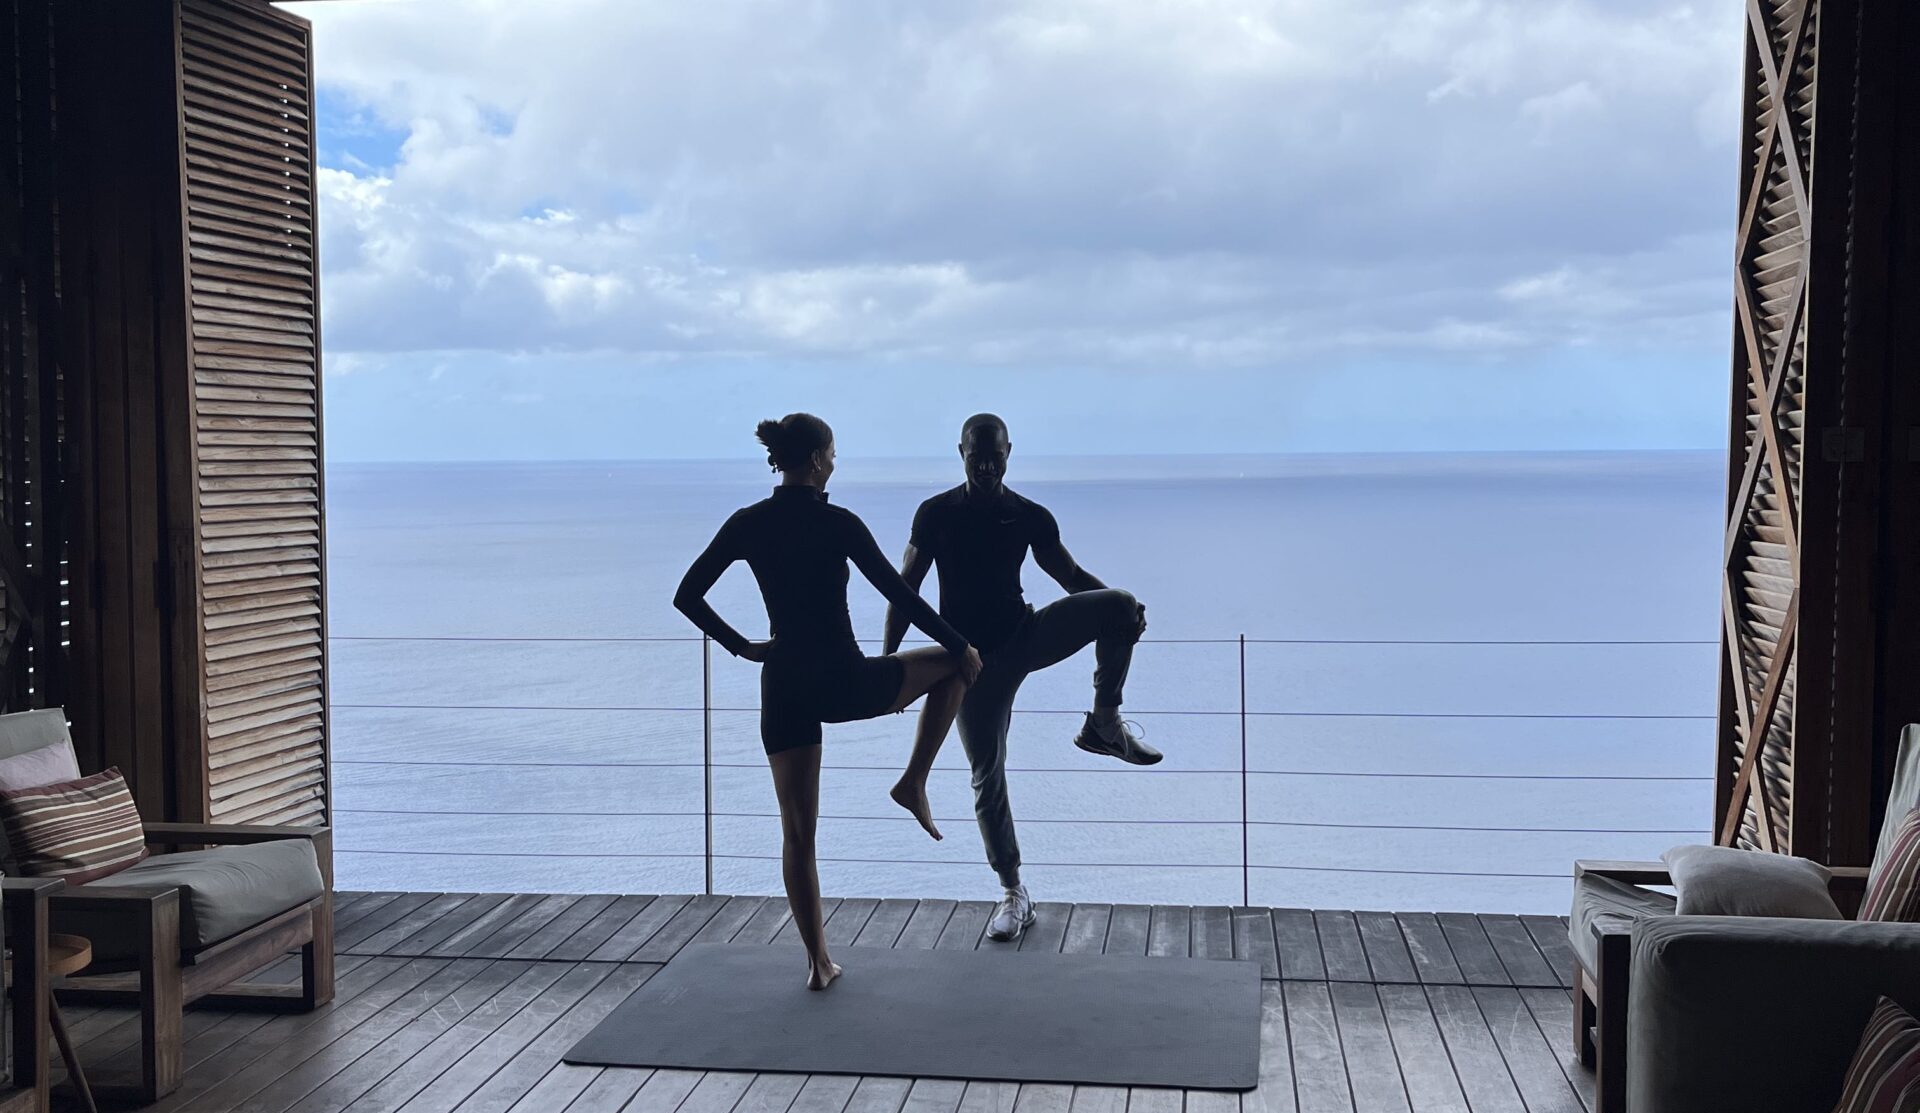 Two people wearing gym clothes face each other, bending and stretching one leg to the side. Behind them is the sea